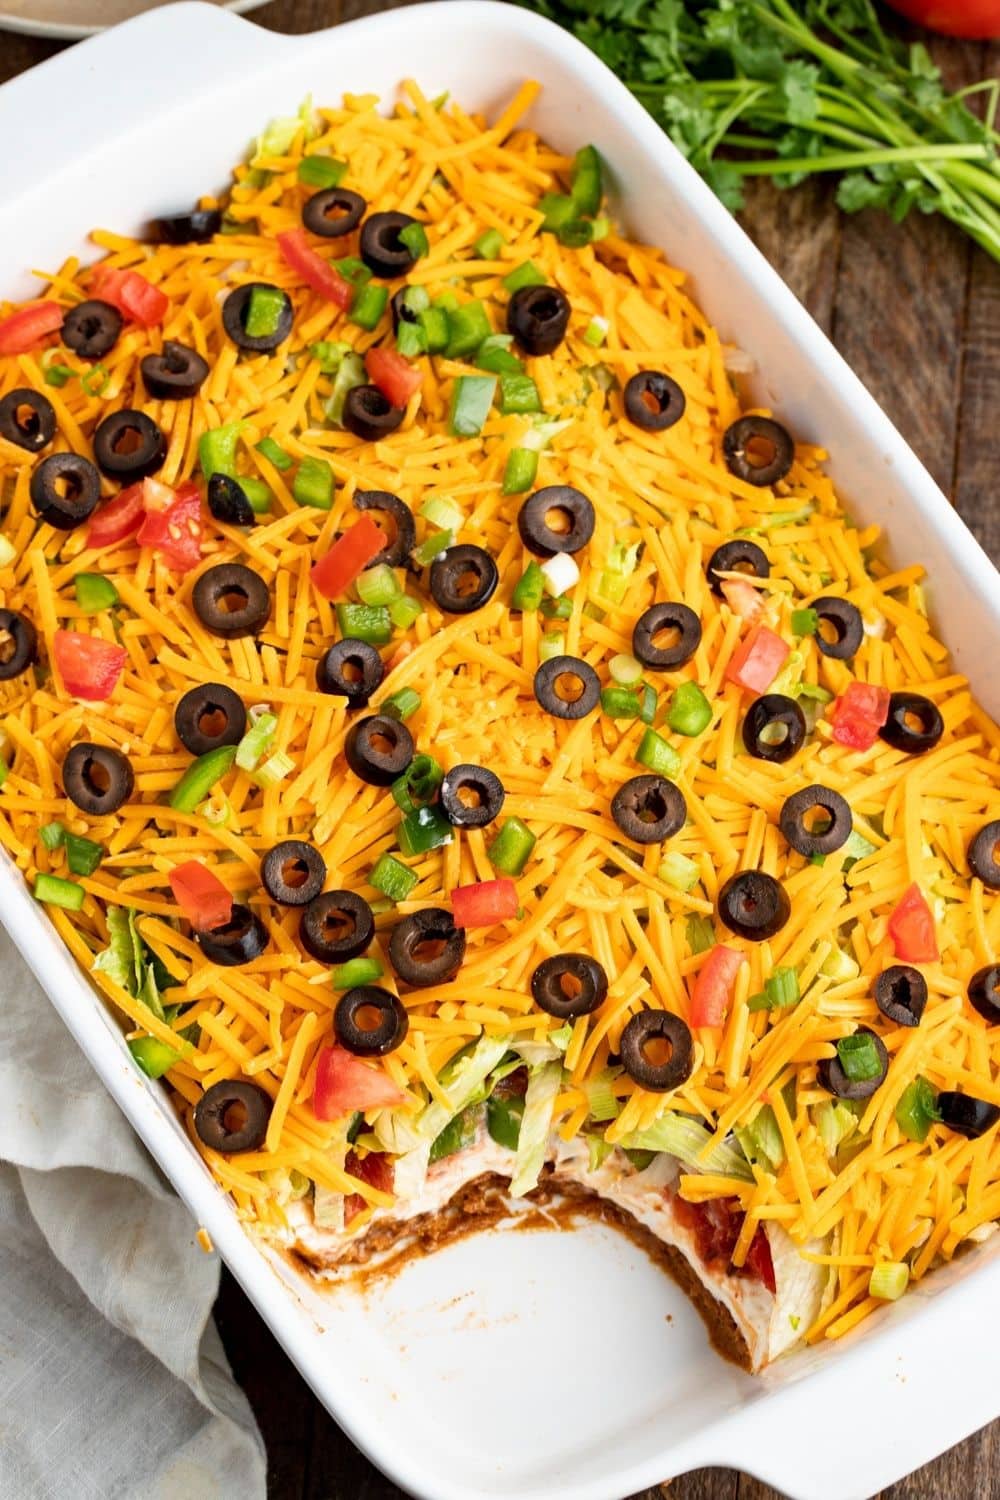 Seven-layer taco dip made with cream sauce, beef, veggies, cheddar cheese, black olives and pepper served on a white casserole. 